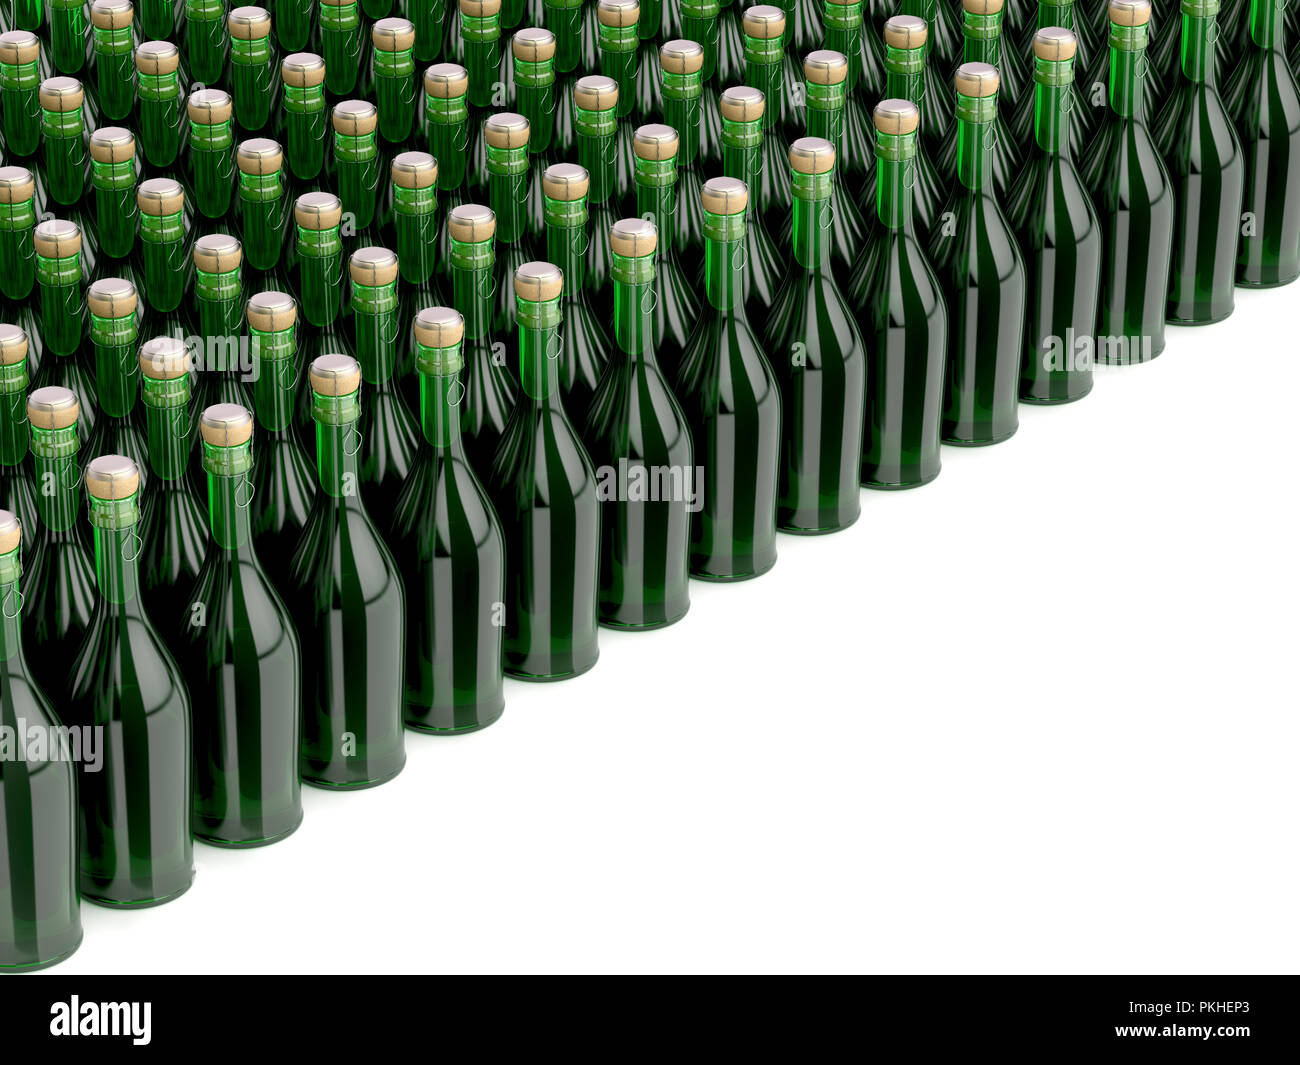 Multiple rows with champagne bottles Stock Photo